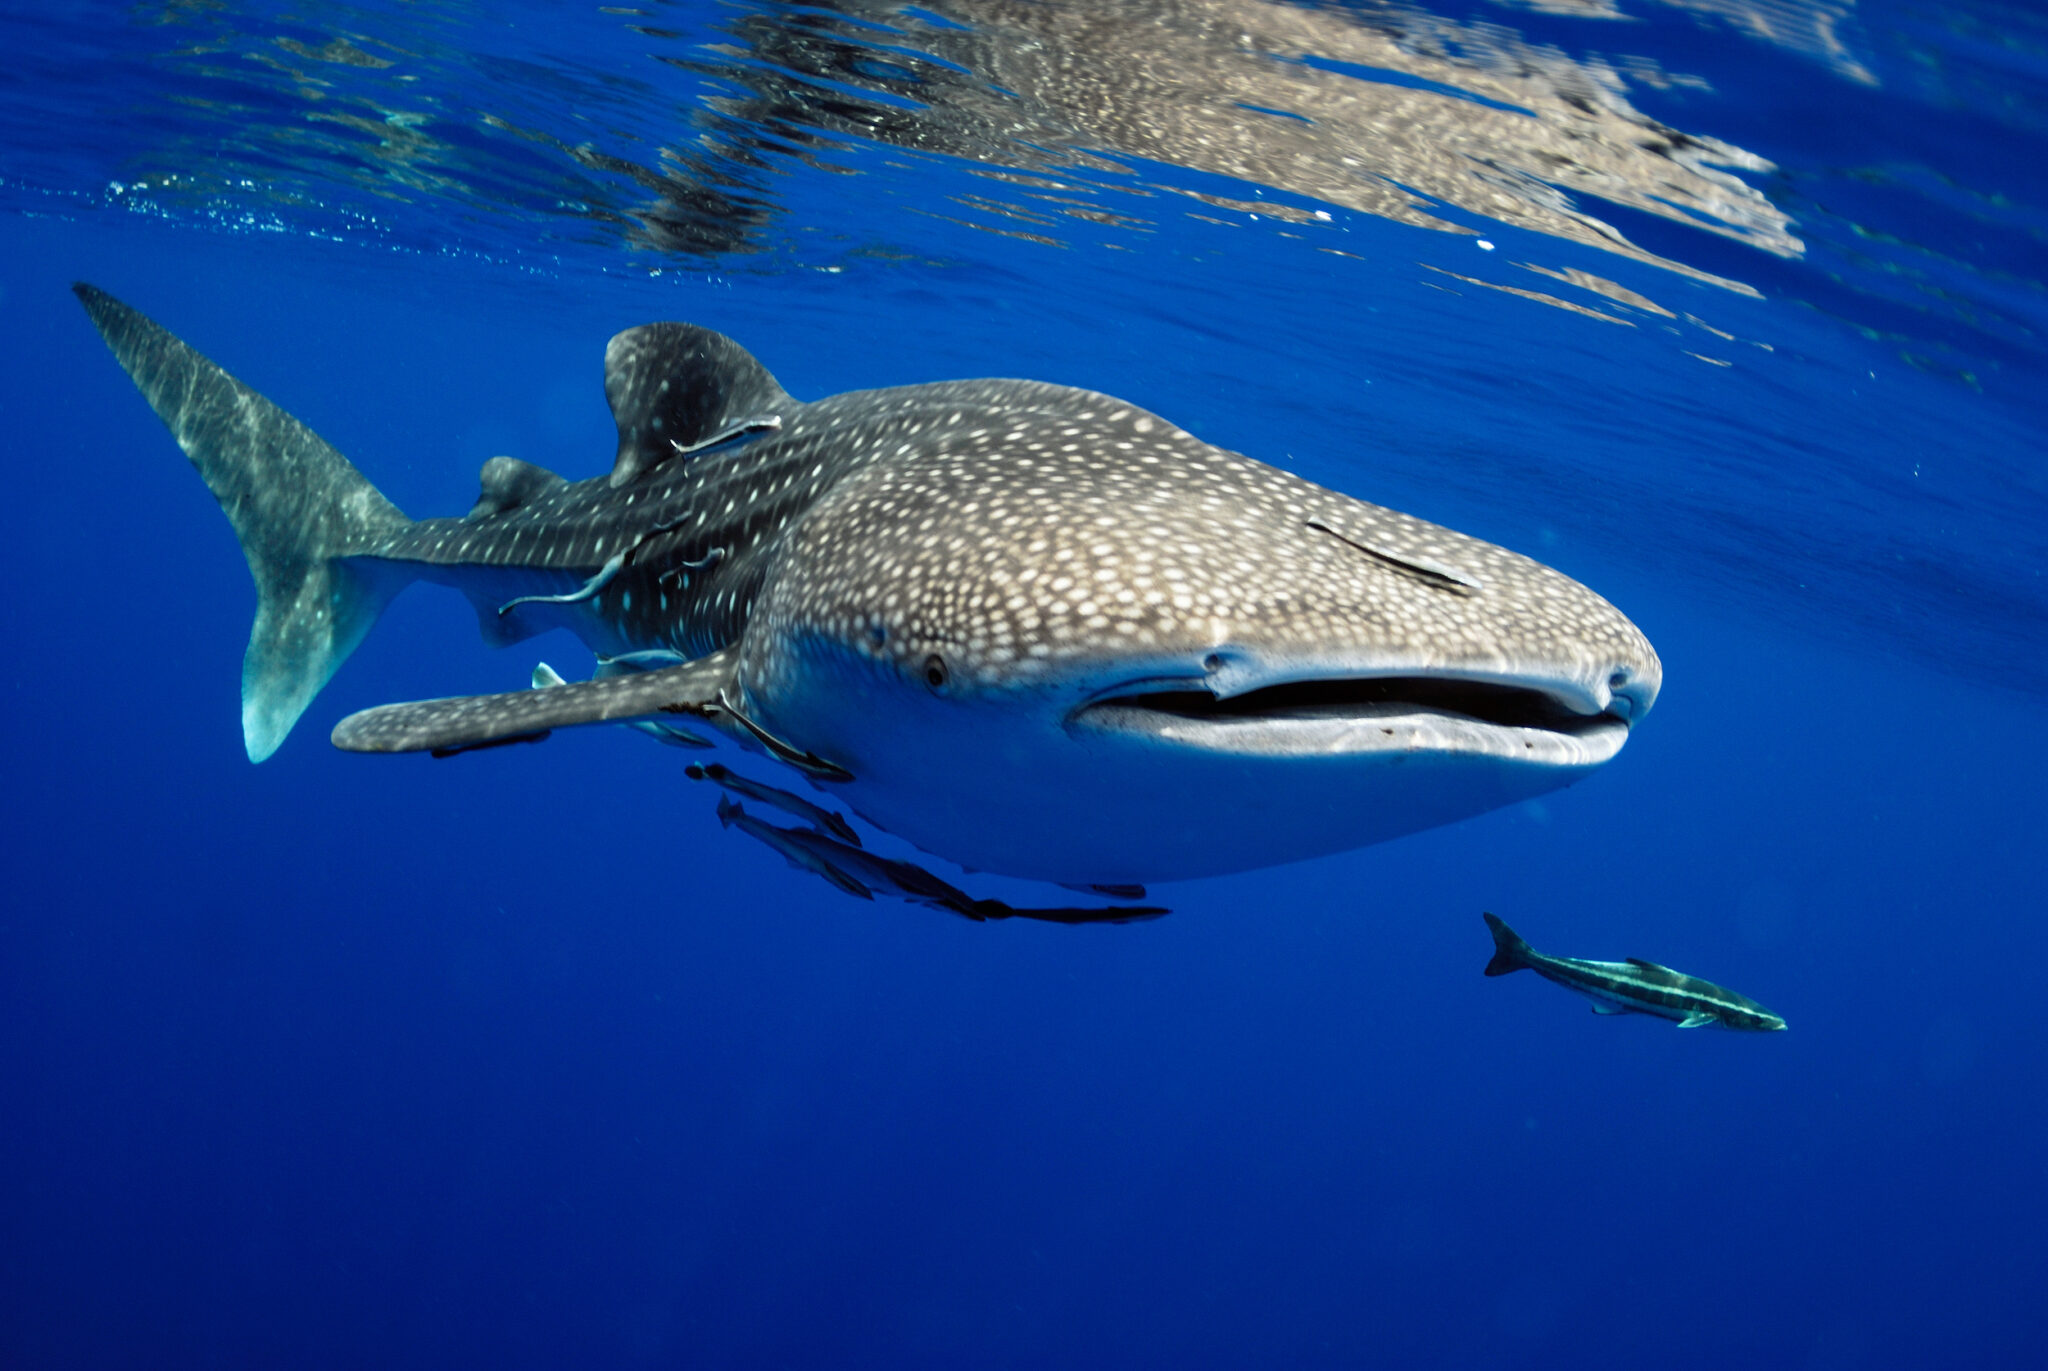 A whale shark cruising below the surface and a reason why so many scuba divers want to visit the Gulf of Tadjoura in Djibouti